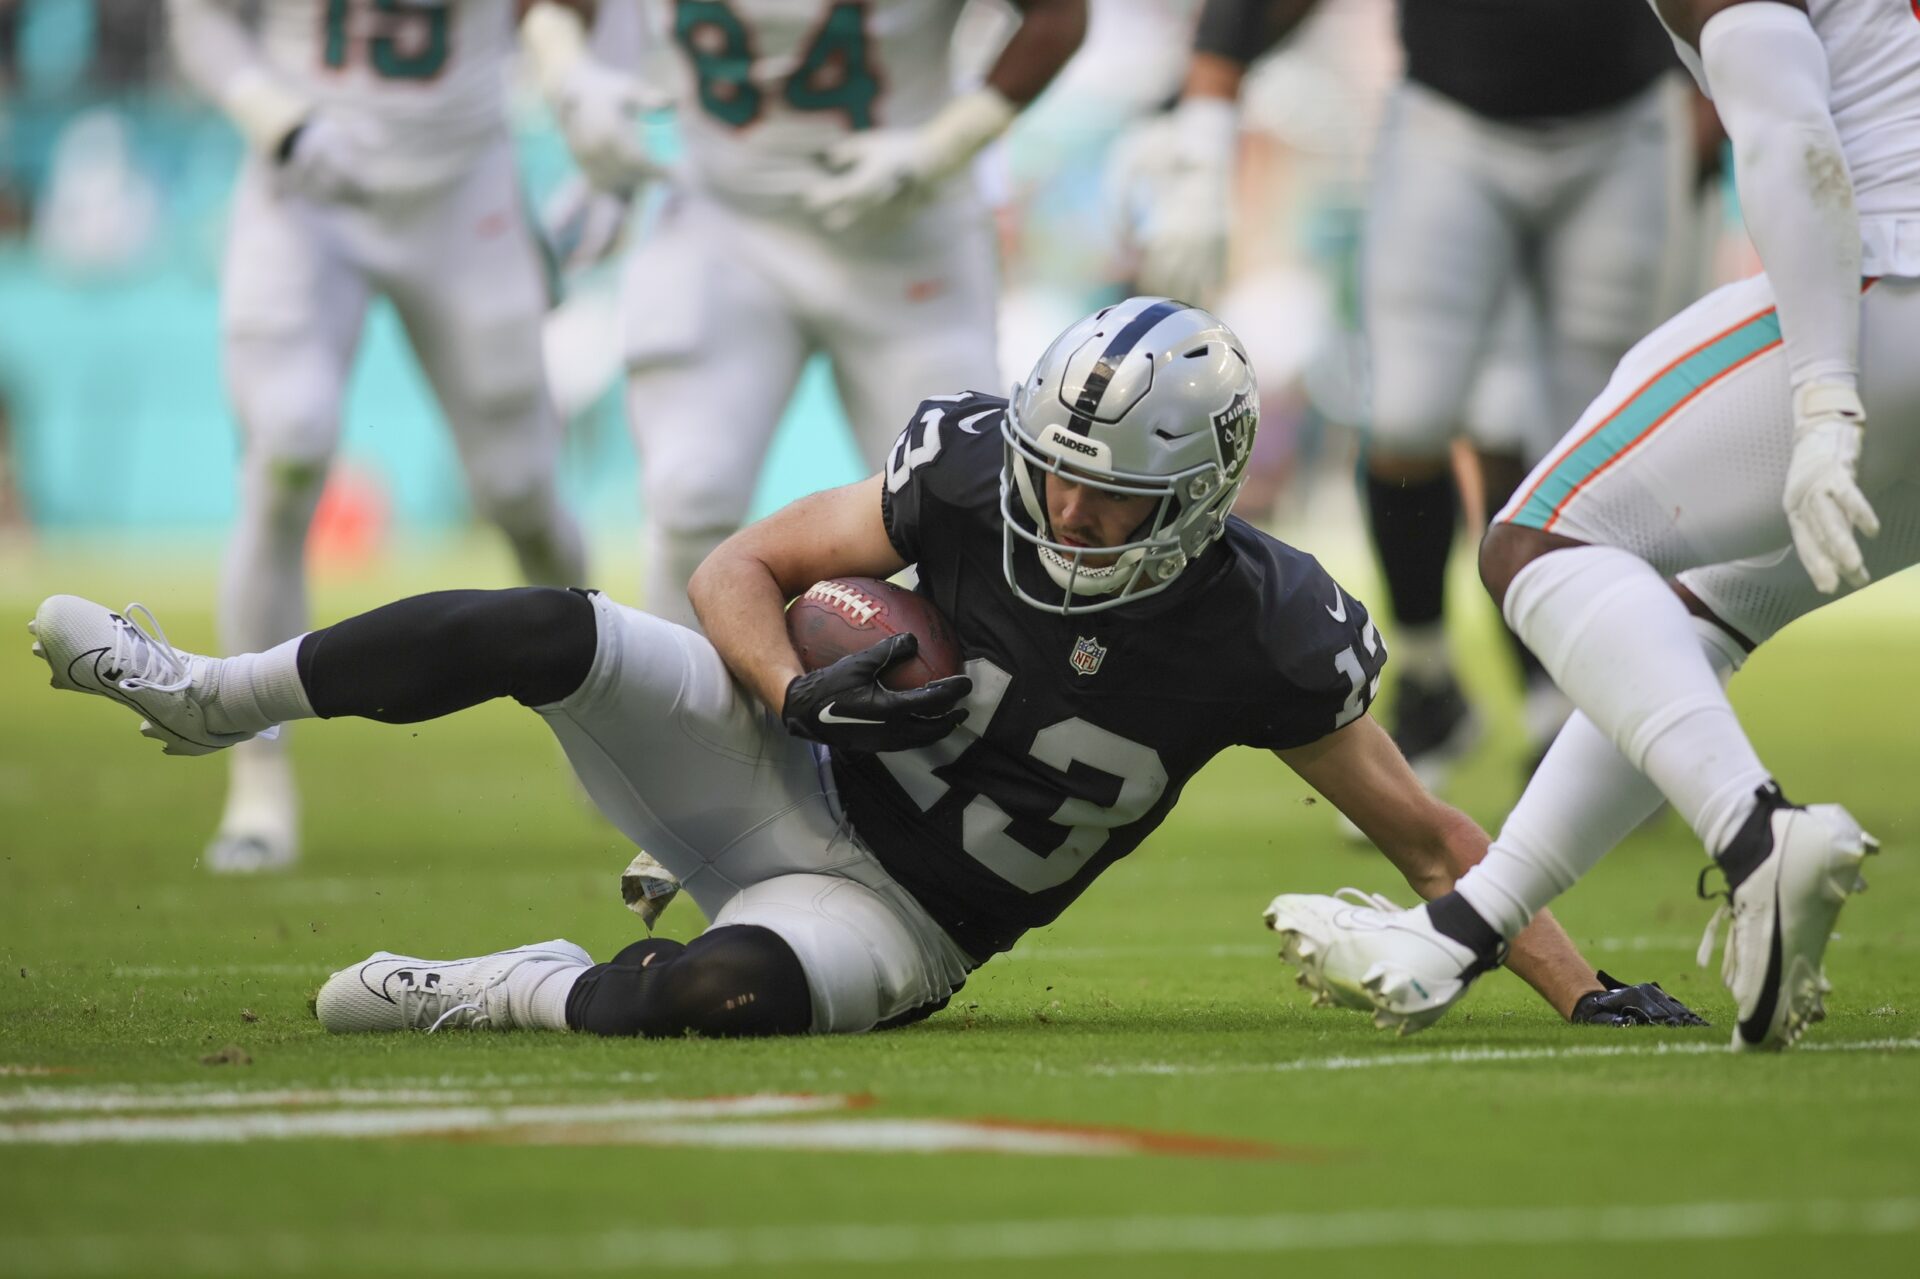 Las Vegas Raiders wide receiver Hunter Renfrow (13) slides after running with the football against the Miami Dolphins during the first quarter at Hard Rock Stadium.